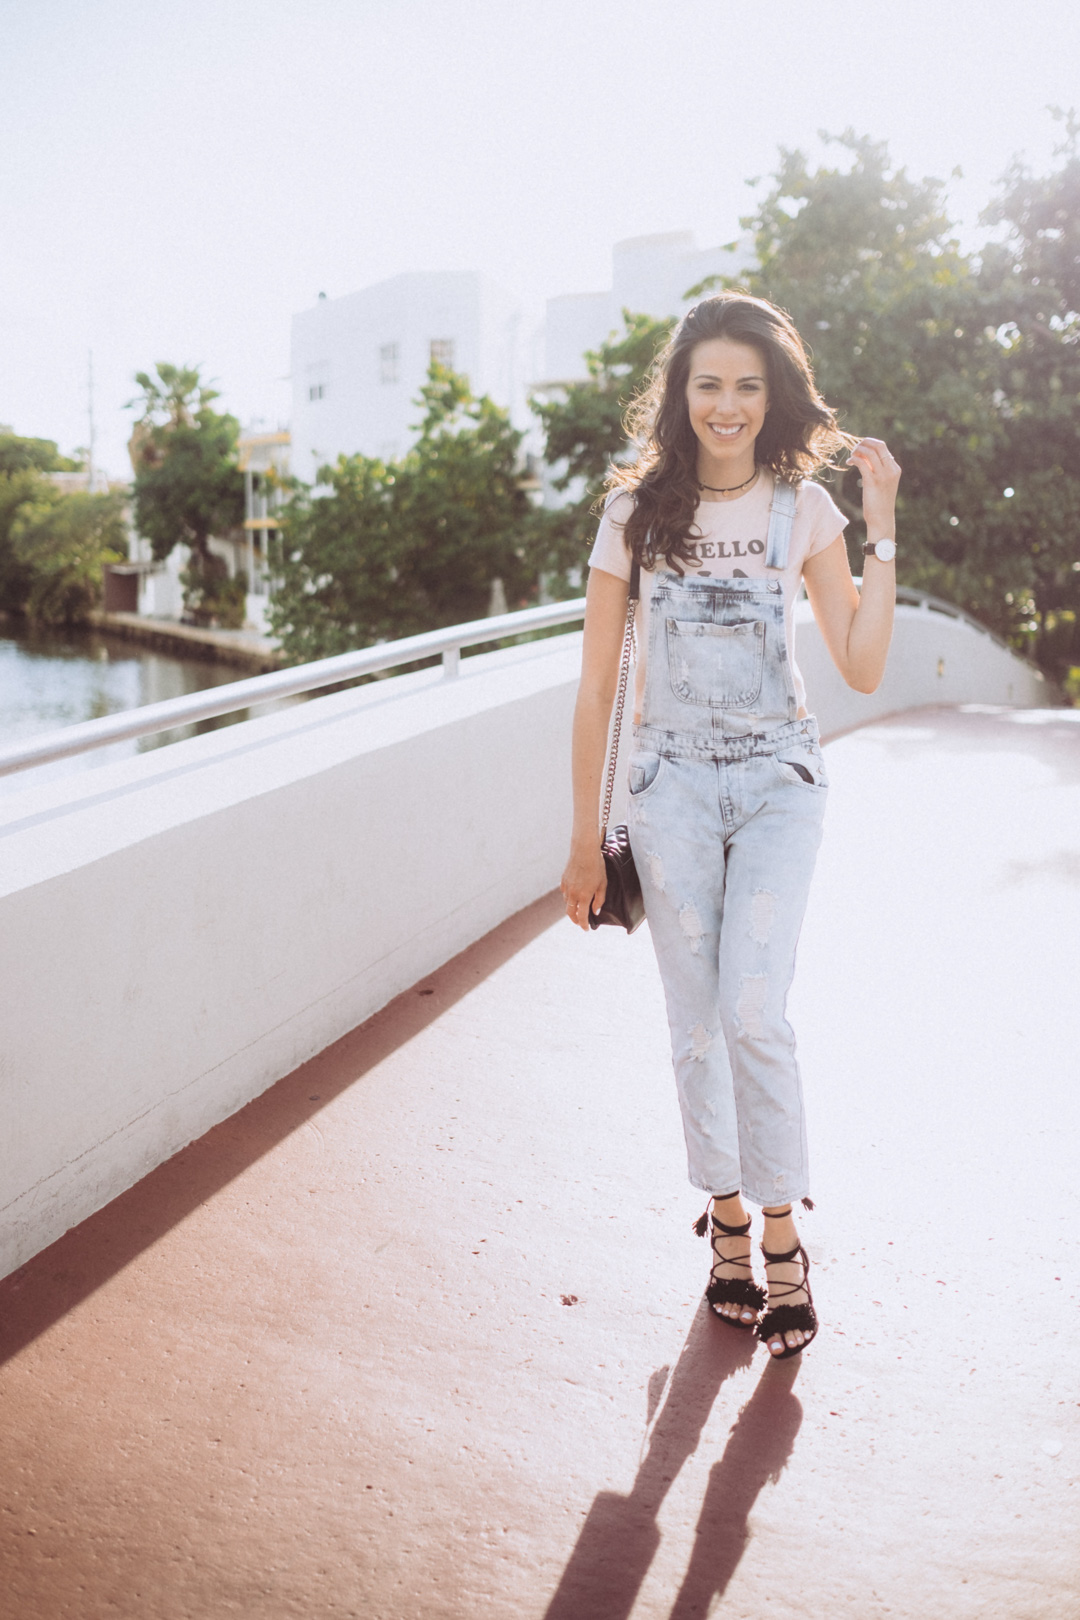 Dash of panache wearing Forever 21 Overalls and Hello LA Tee